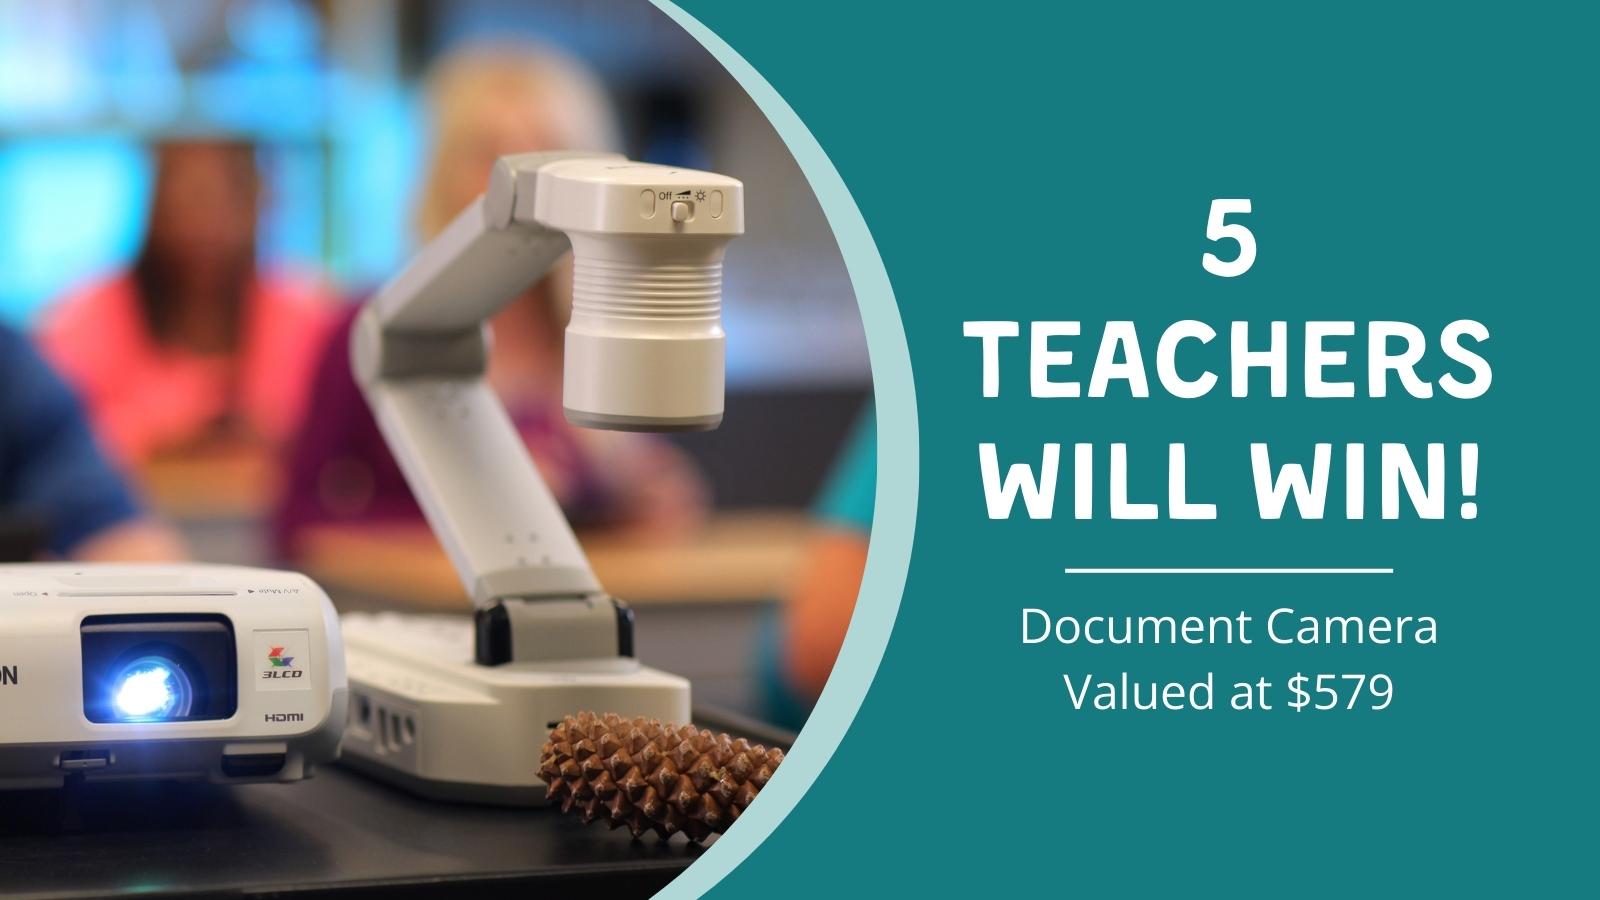 Epson Document Camera Giveaway